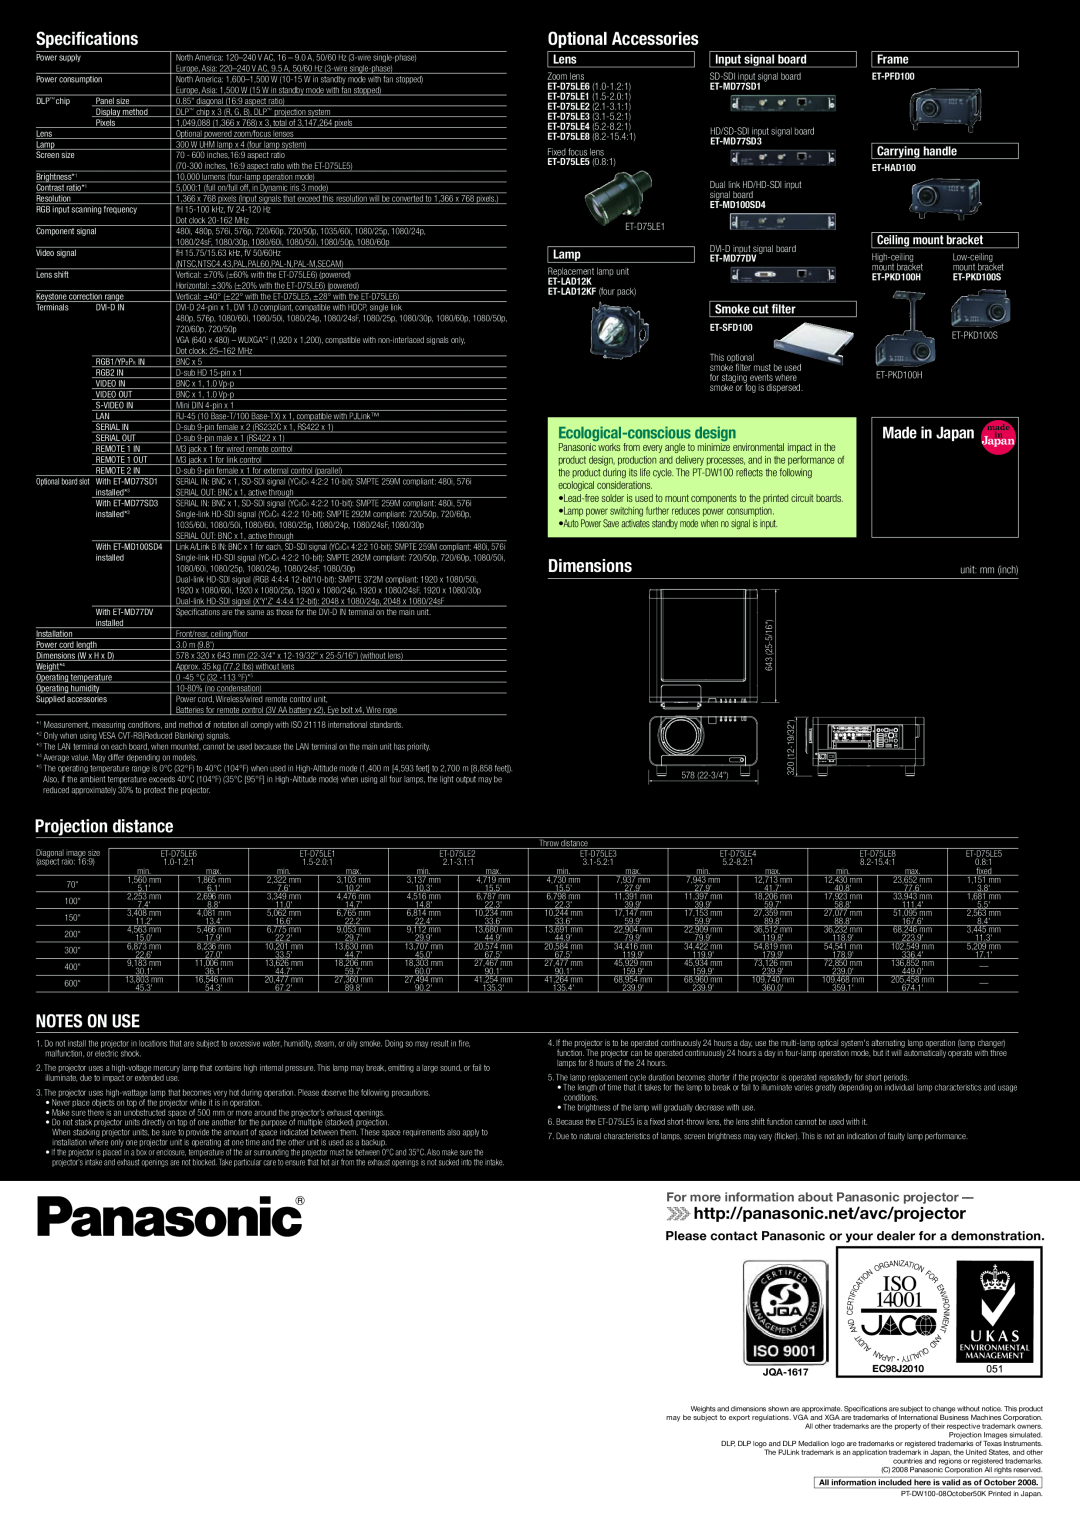 Panasonic PT-DW100 Specifications, Dimensions, Projection distance, Notes On Use, Ecological-conscious design, Lens, Lamp 